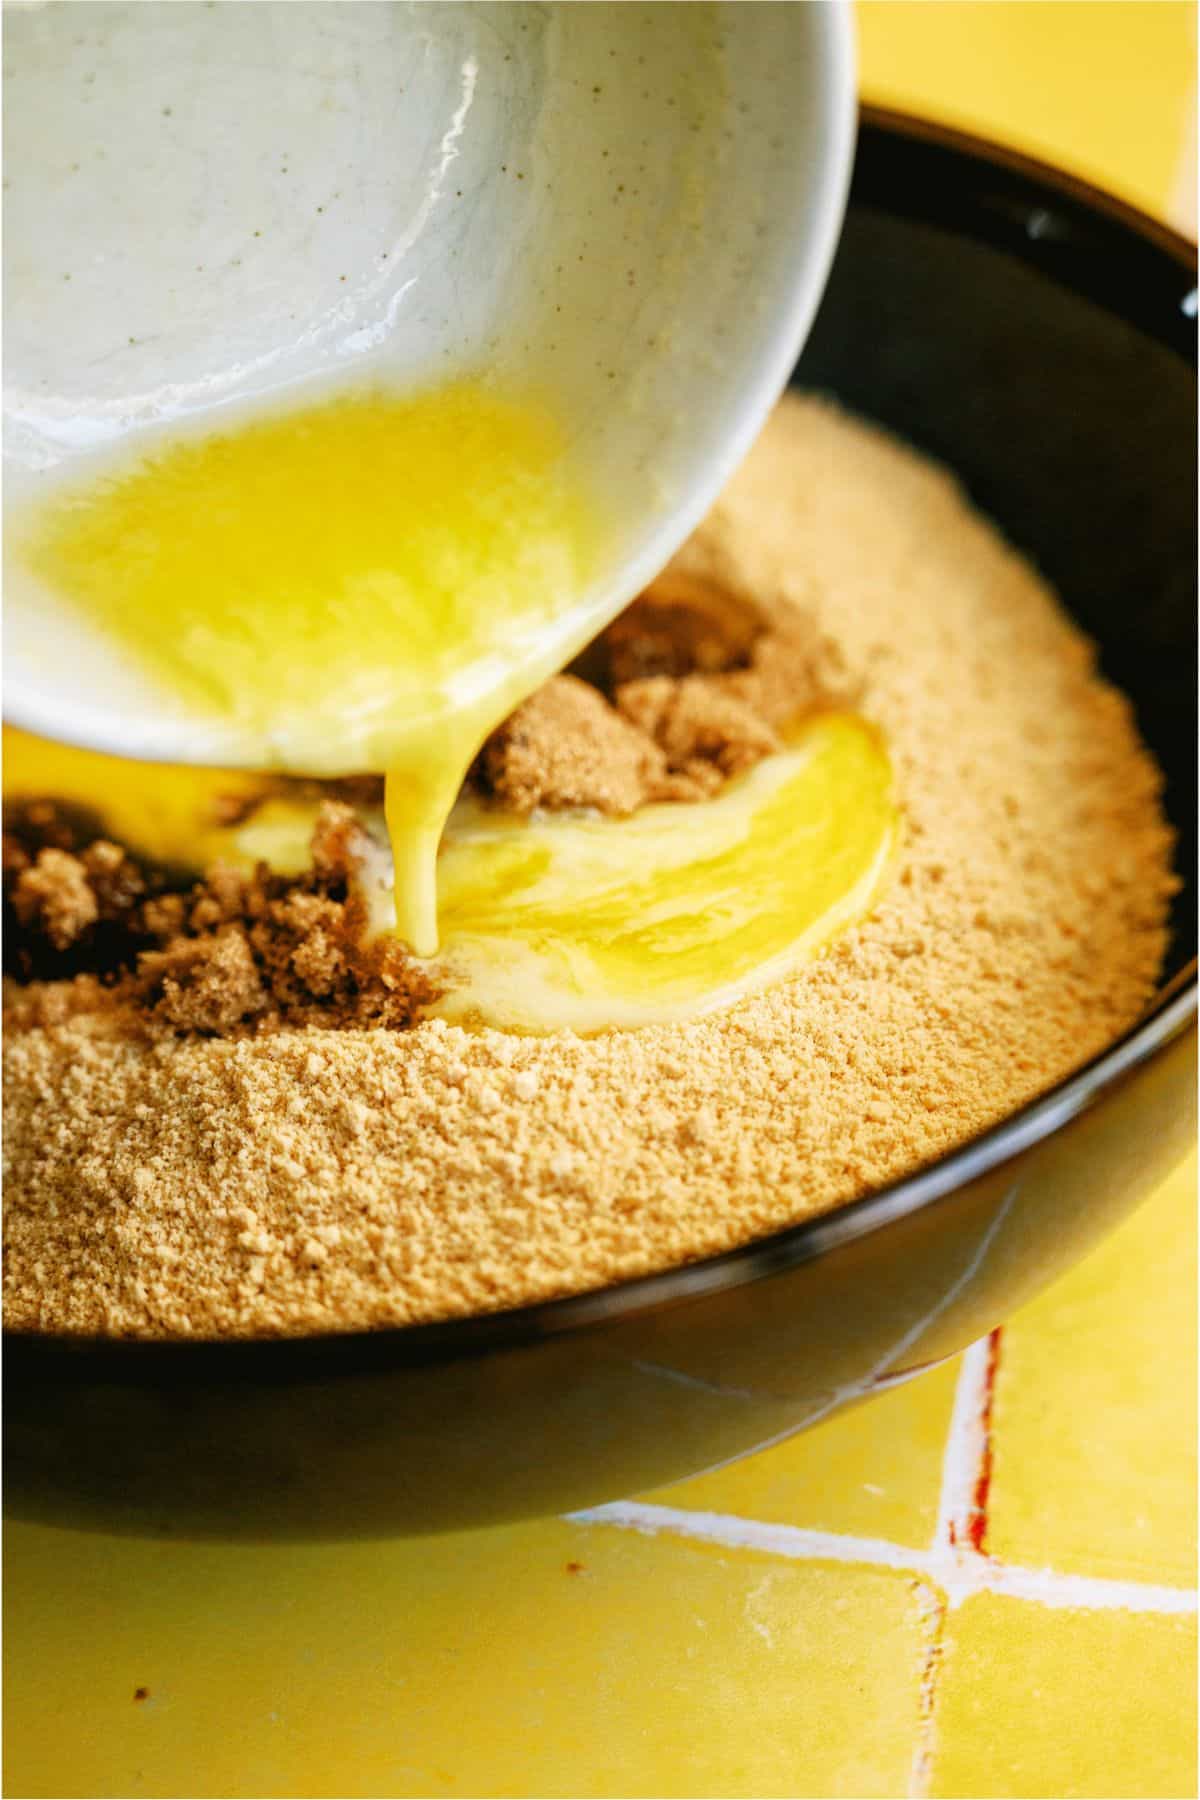 Melted butter mixed with graham cracker crumbs and brown sugar to make pie crust